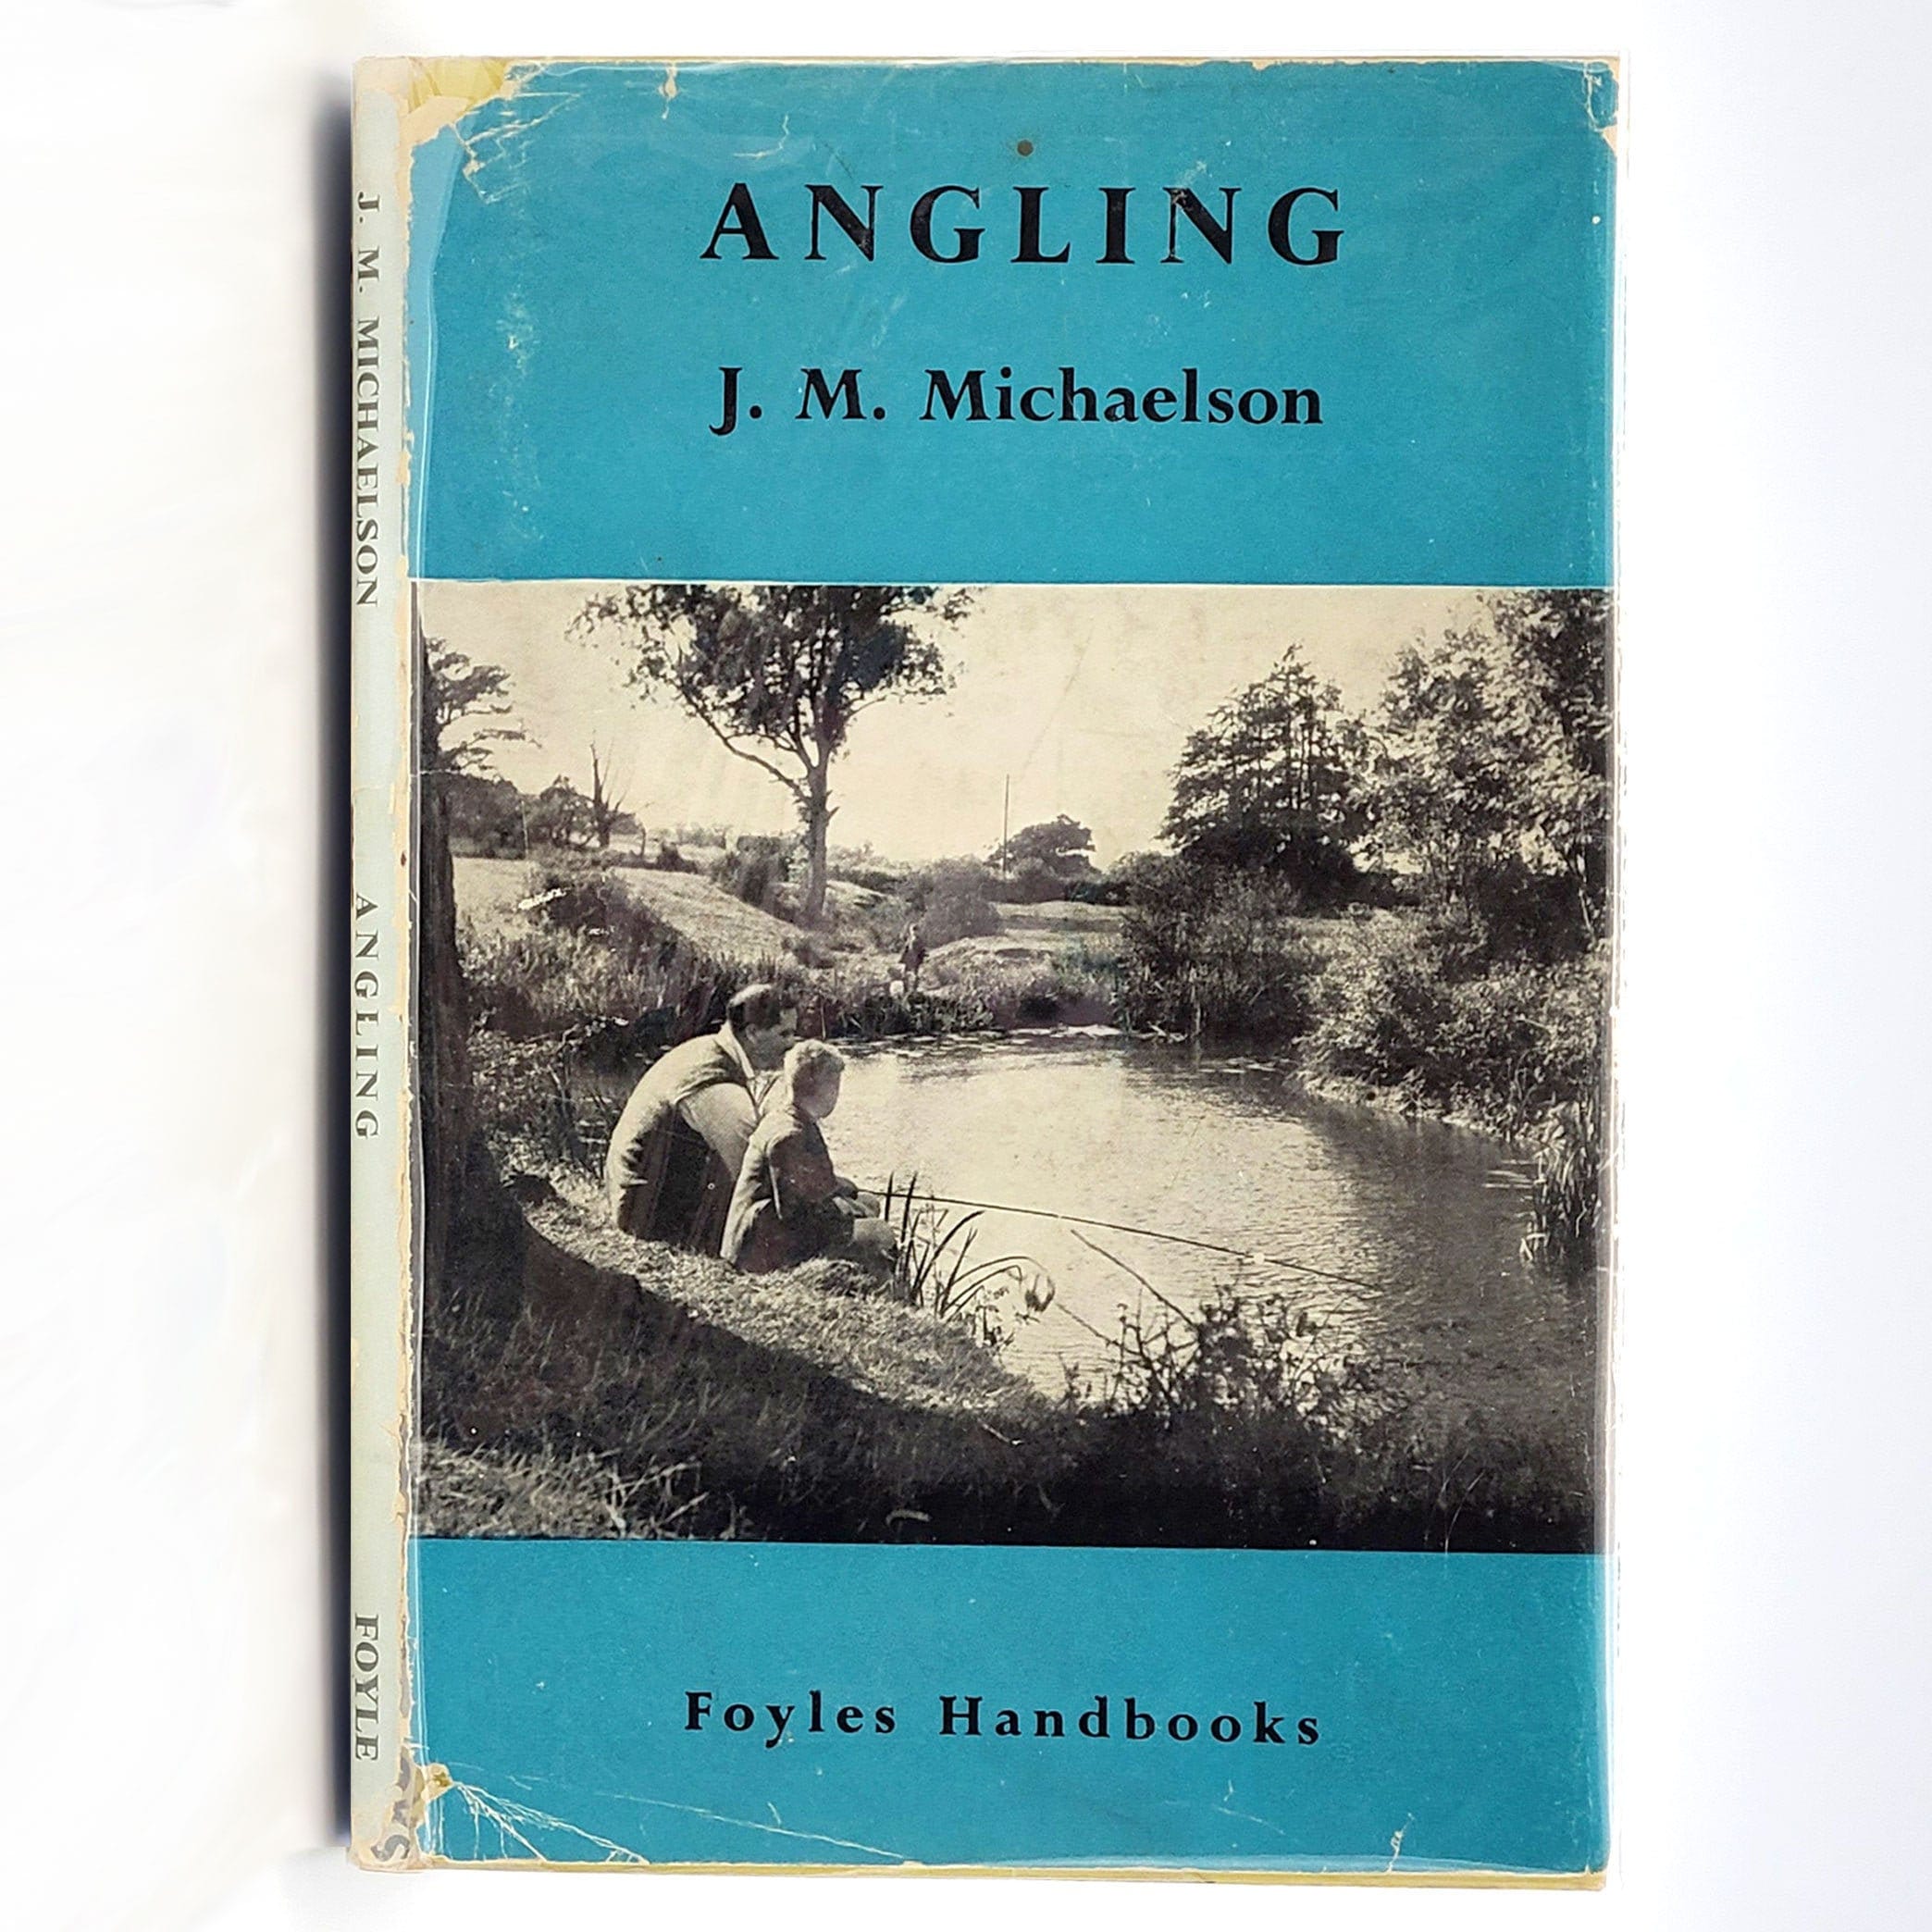 Angling for Every Man in Dust Jacket Ca. 1950 by J.M Michaelson - Foyles  Handbooks - Sea Fishing - Coarse Fishing - British